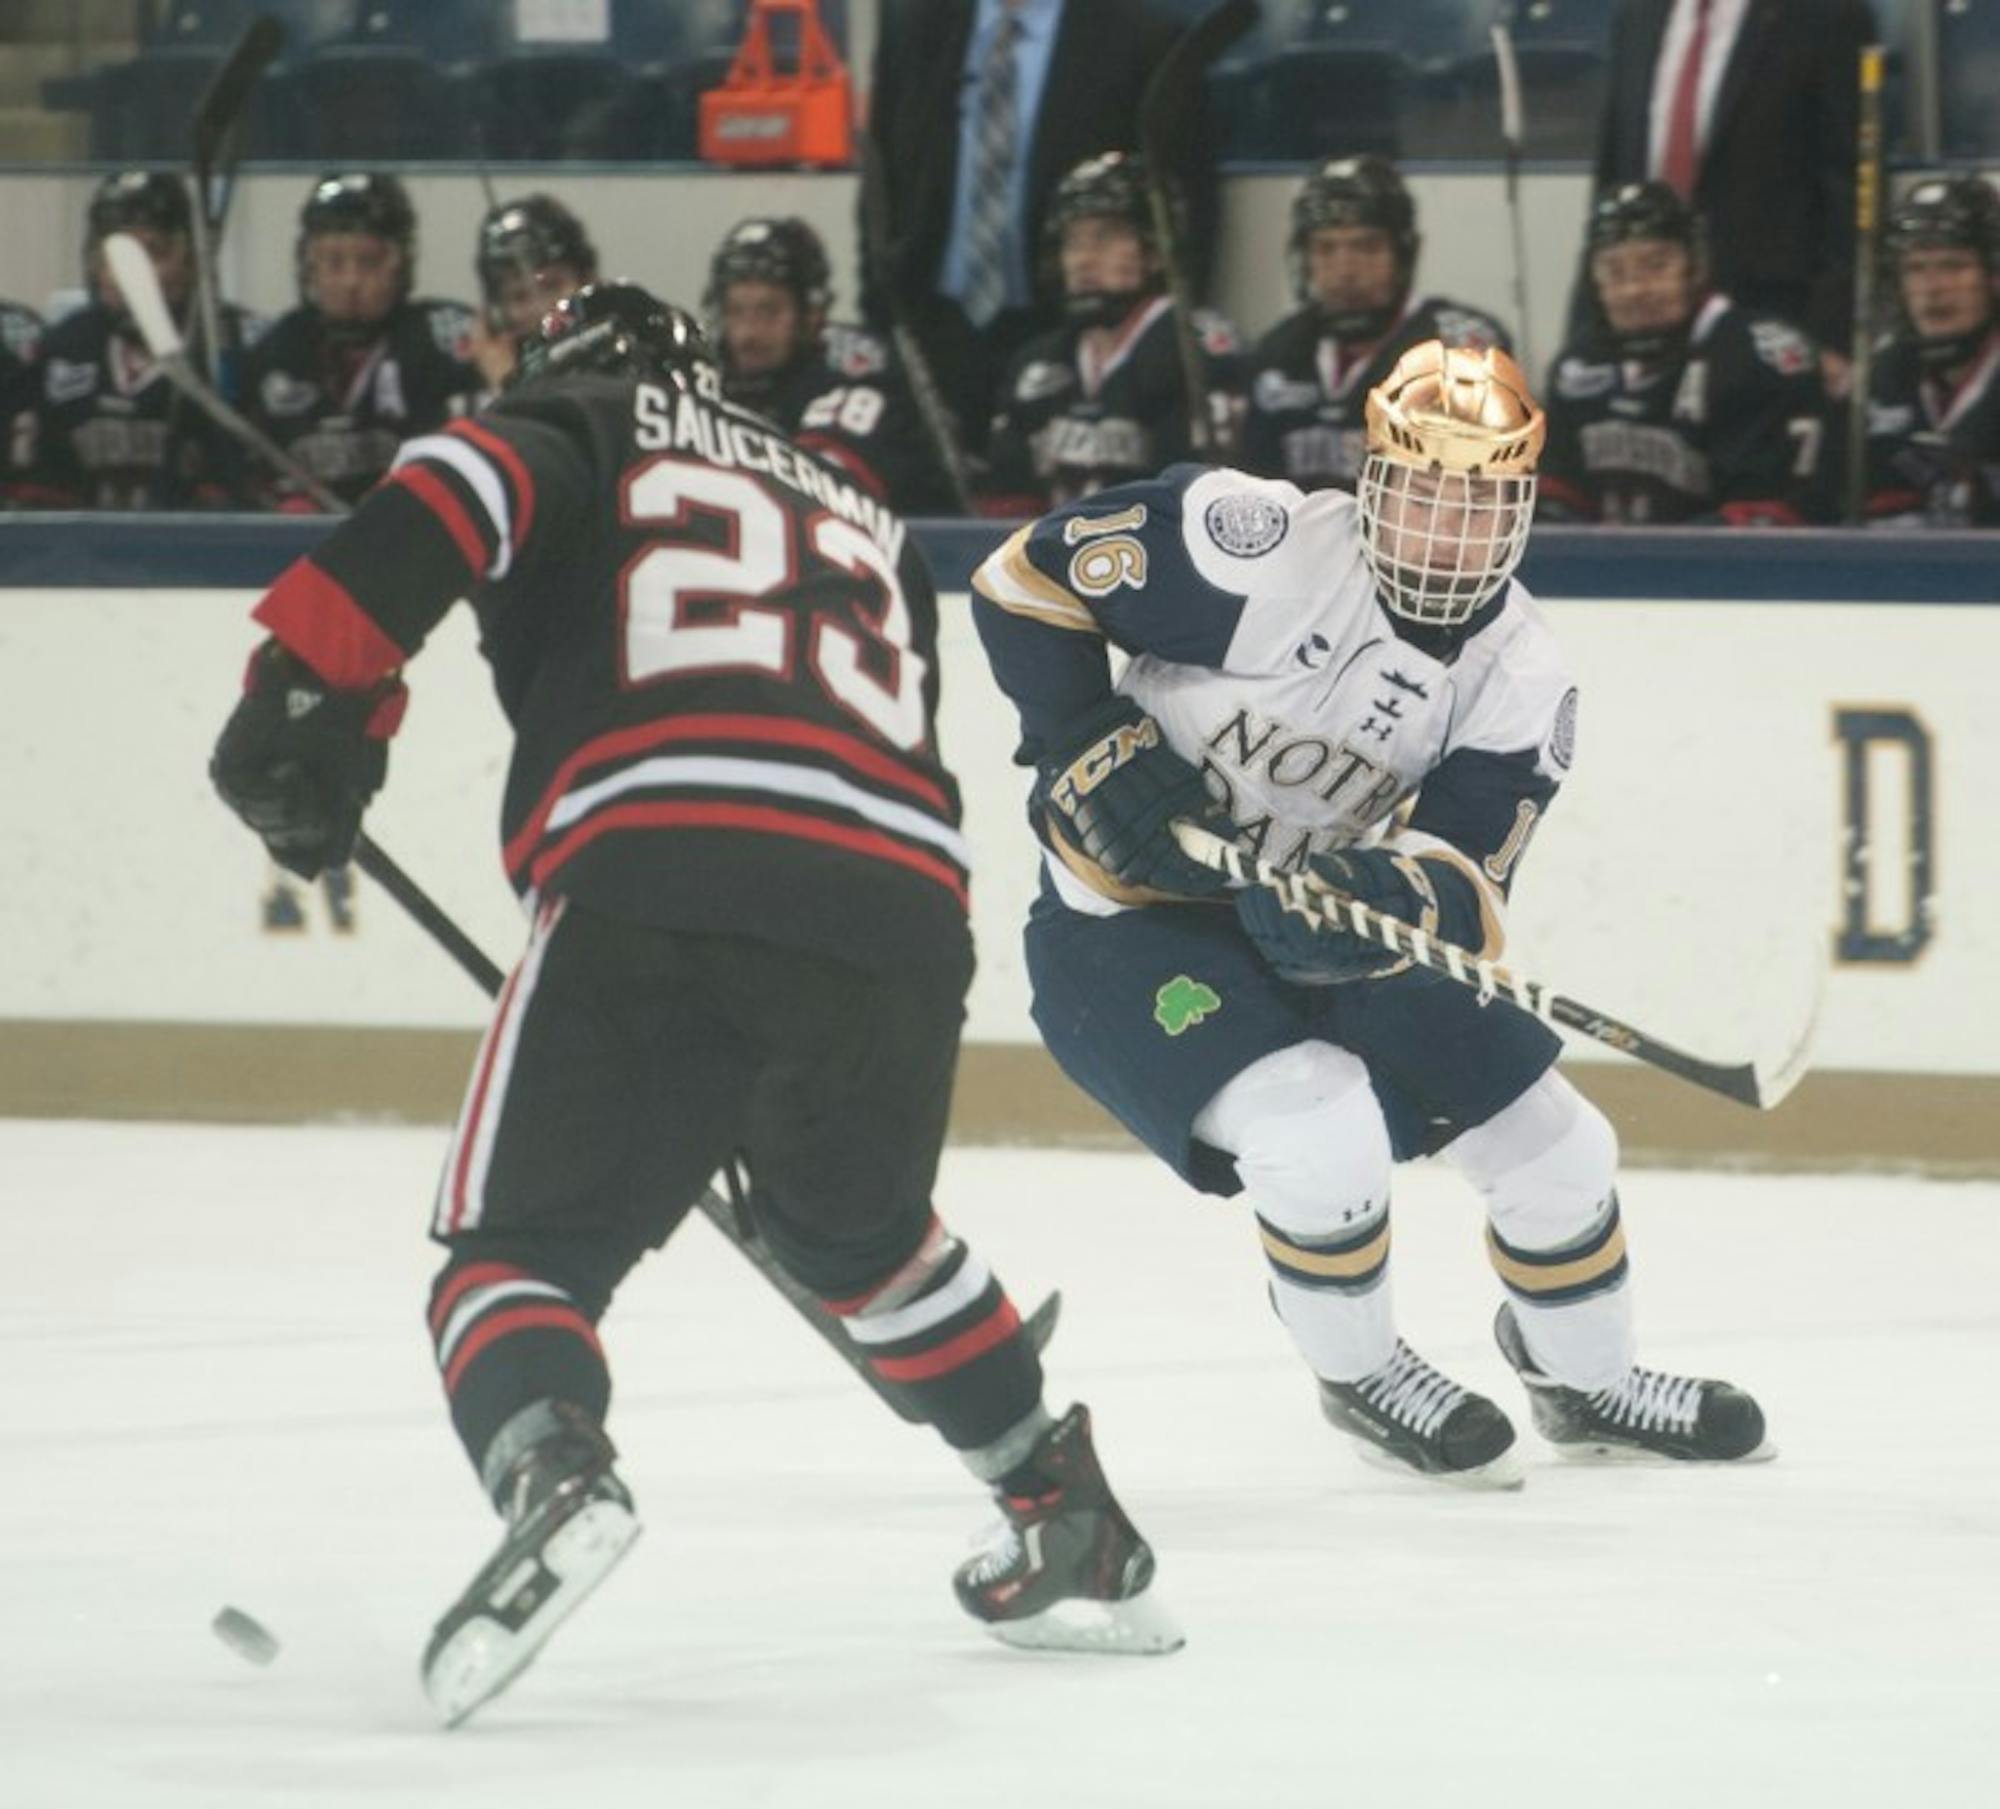 Irish sophomore center Connor Hurley looks to attack the puck during Notre Dame’s 3-2 win over  Northeastern on Thursday at Compton Family Ice Arena. Hurley scored one goal in Friday’s 2-2 tie.